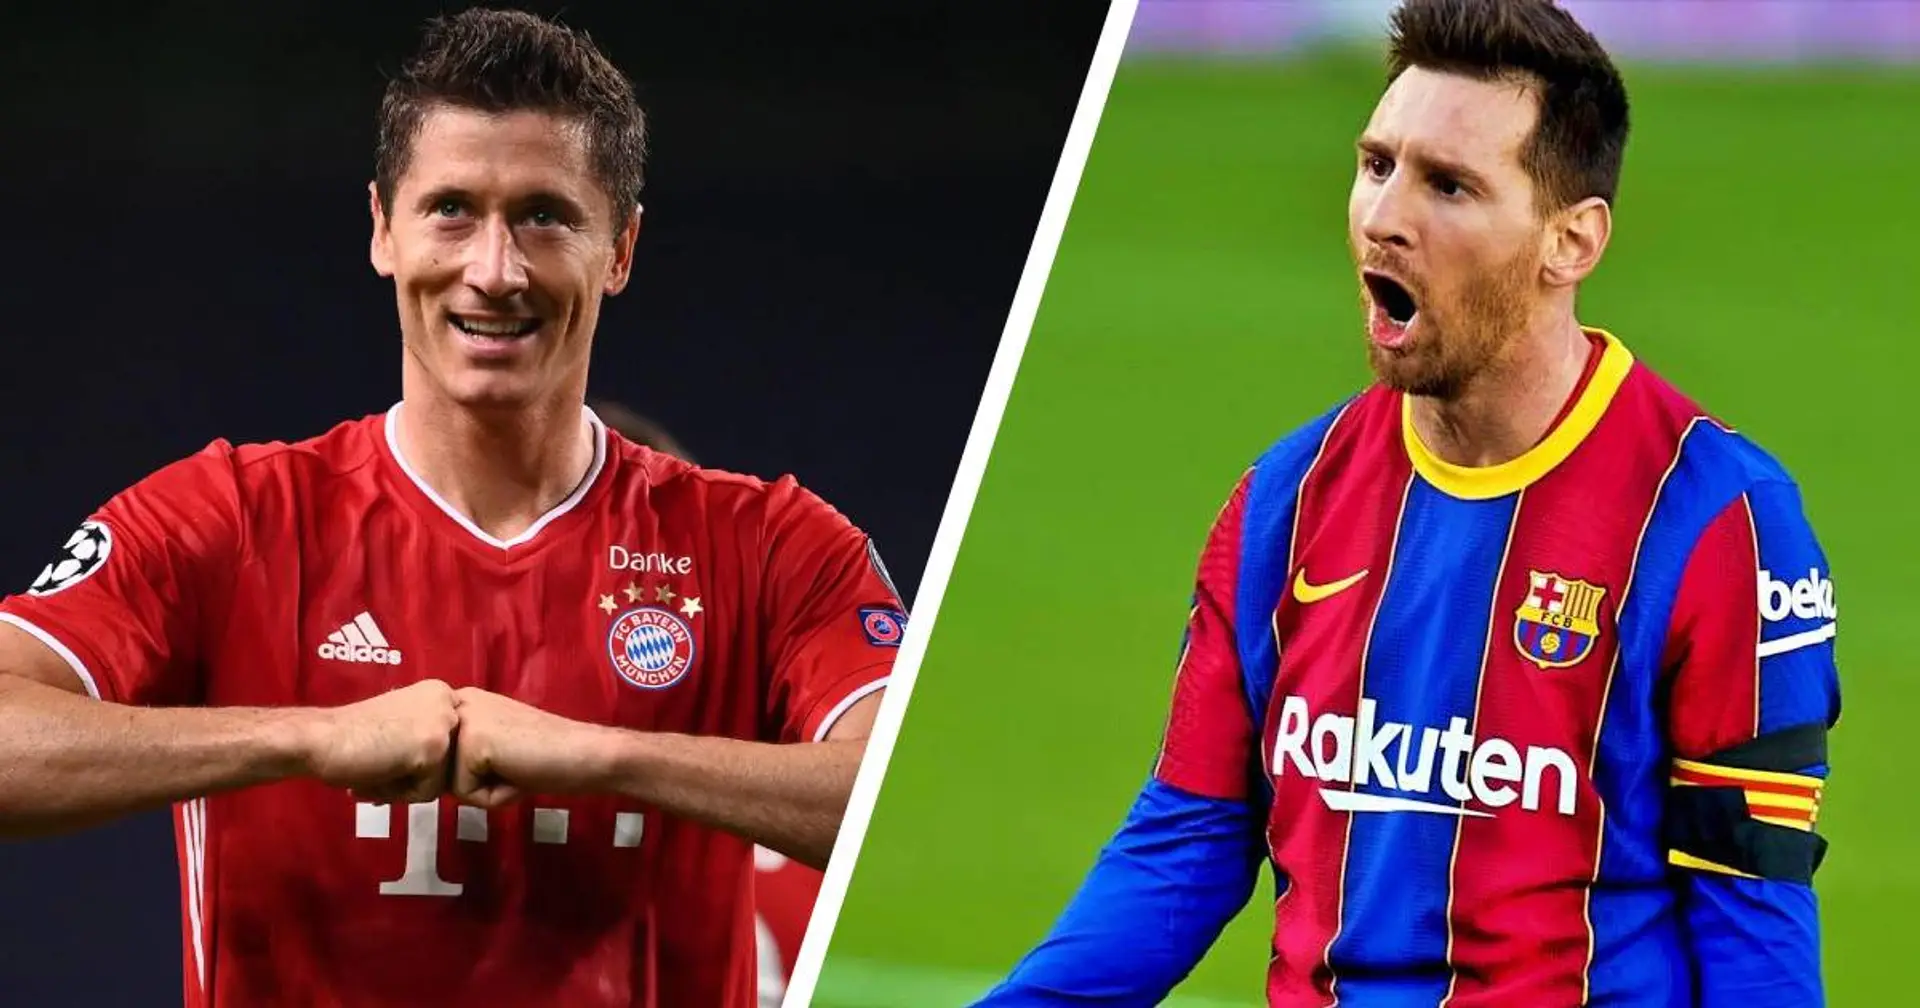 Leo Messi only behind Robert Lewandowski in total goal contributions in 2020